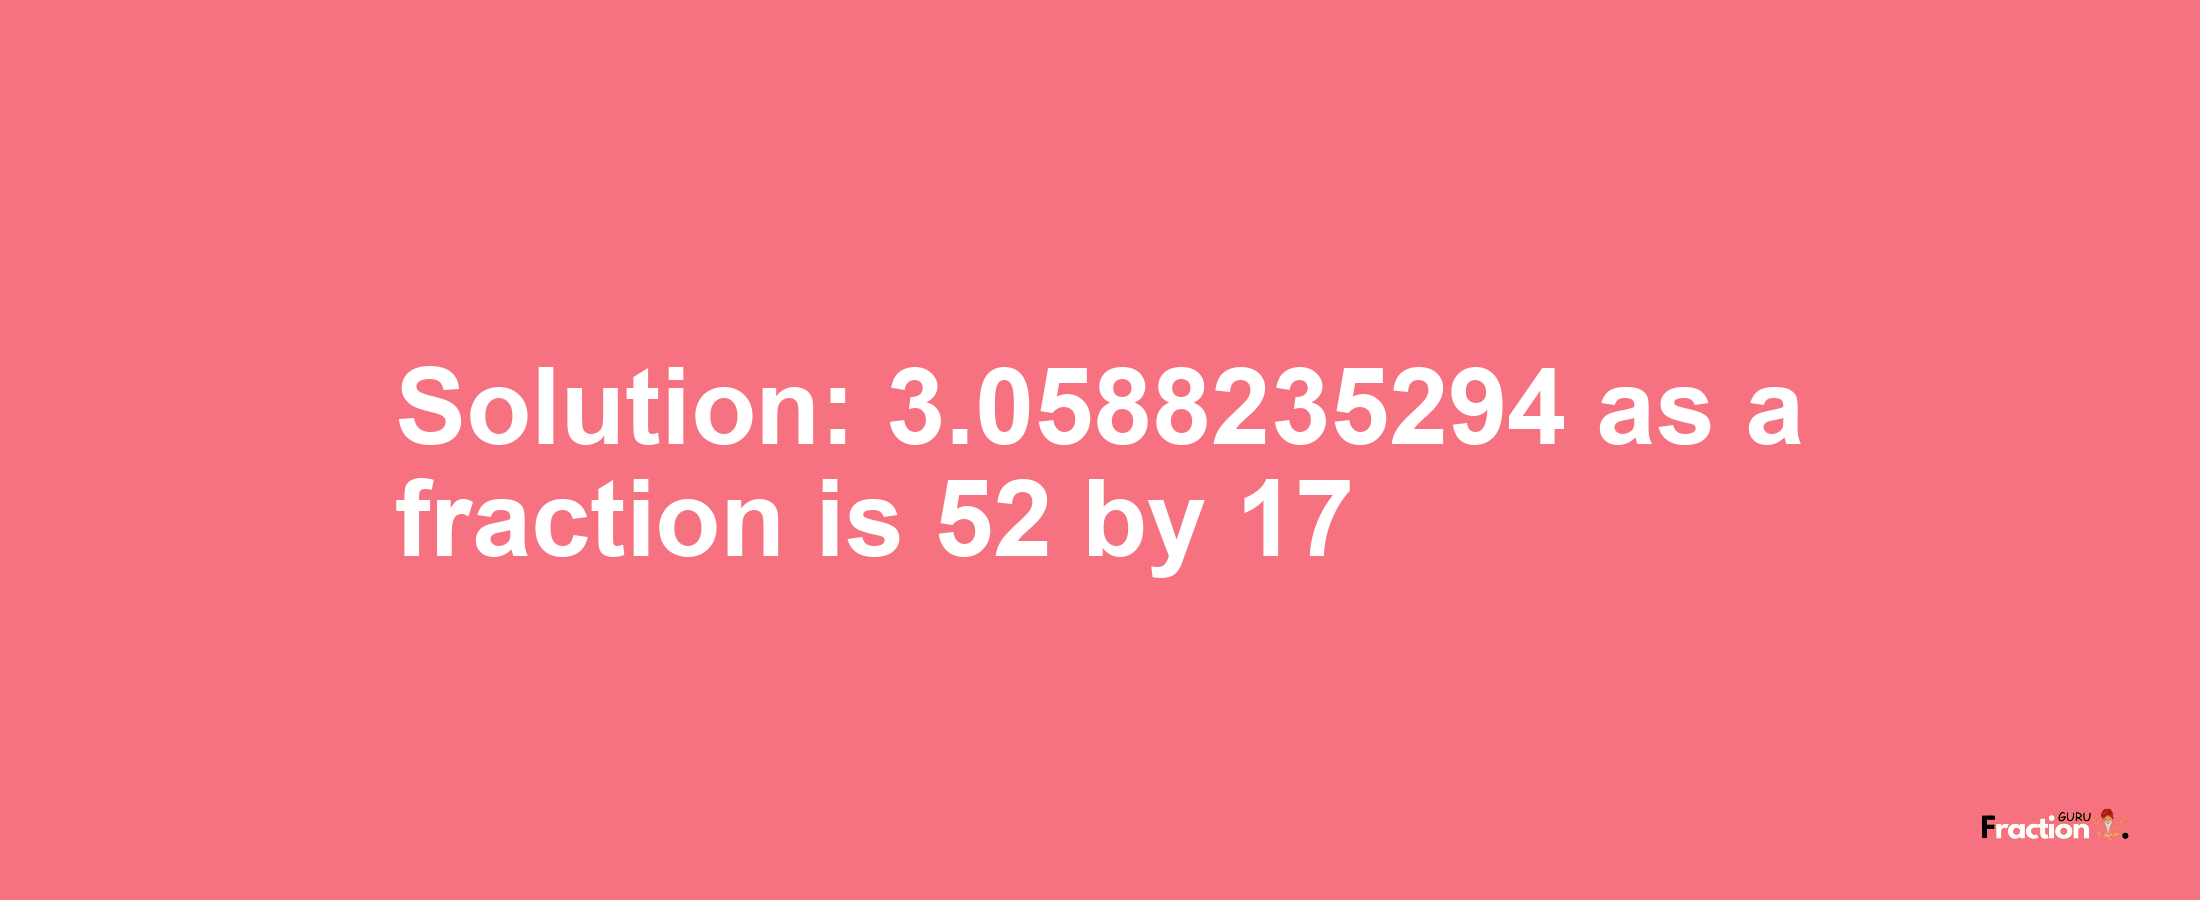 Solution:3.0588235294 as a fraction is 52/17